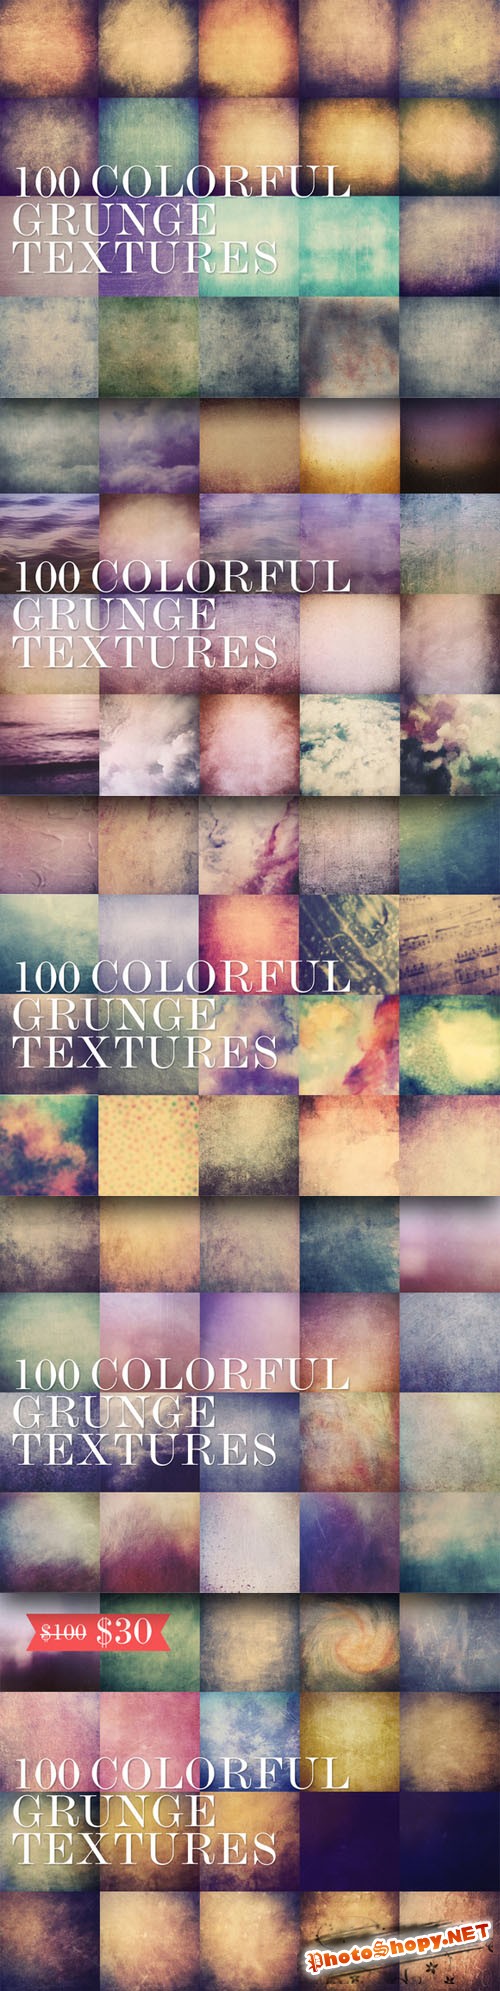 CreativeMarket - 100 Colorful Grunge Textures 5000px